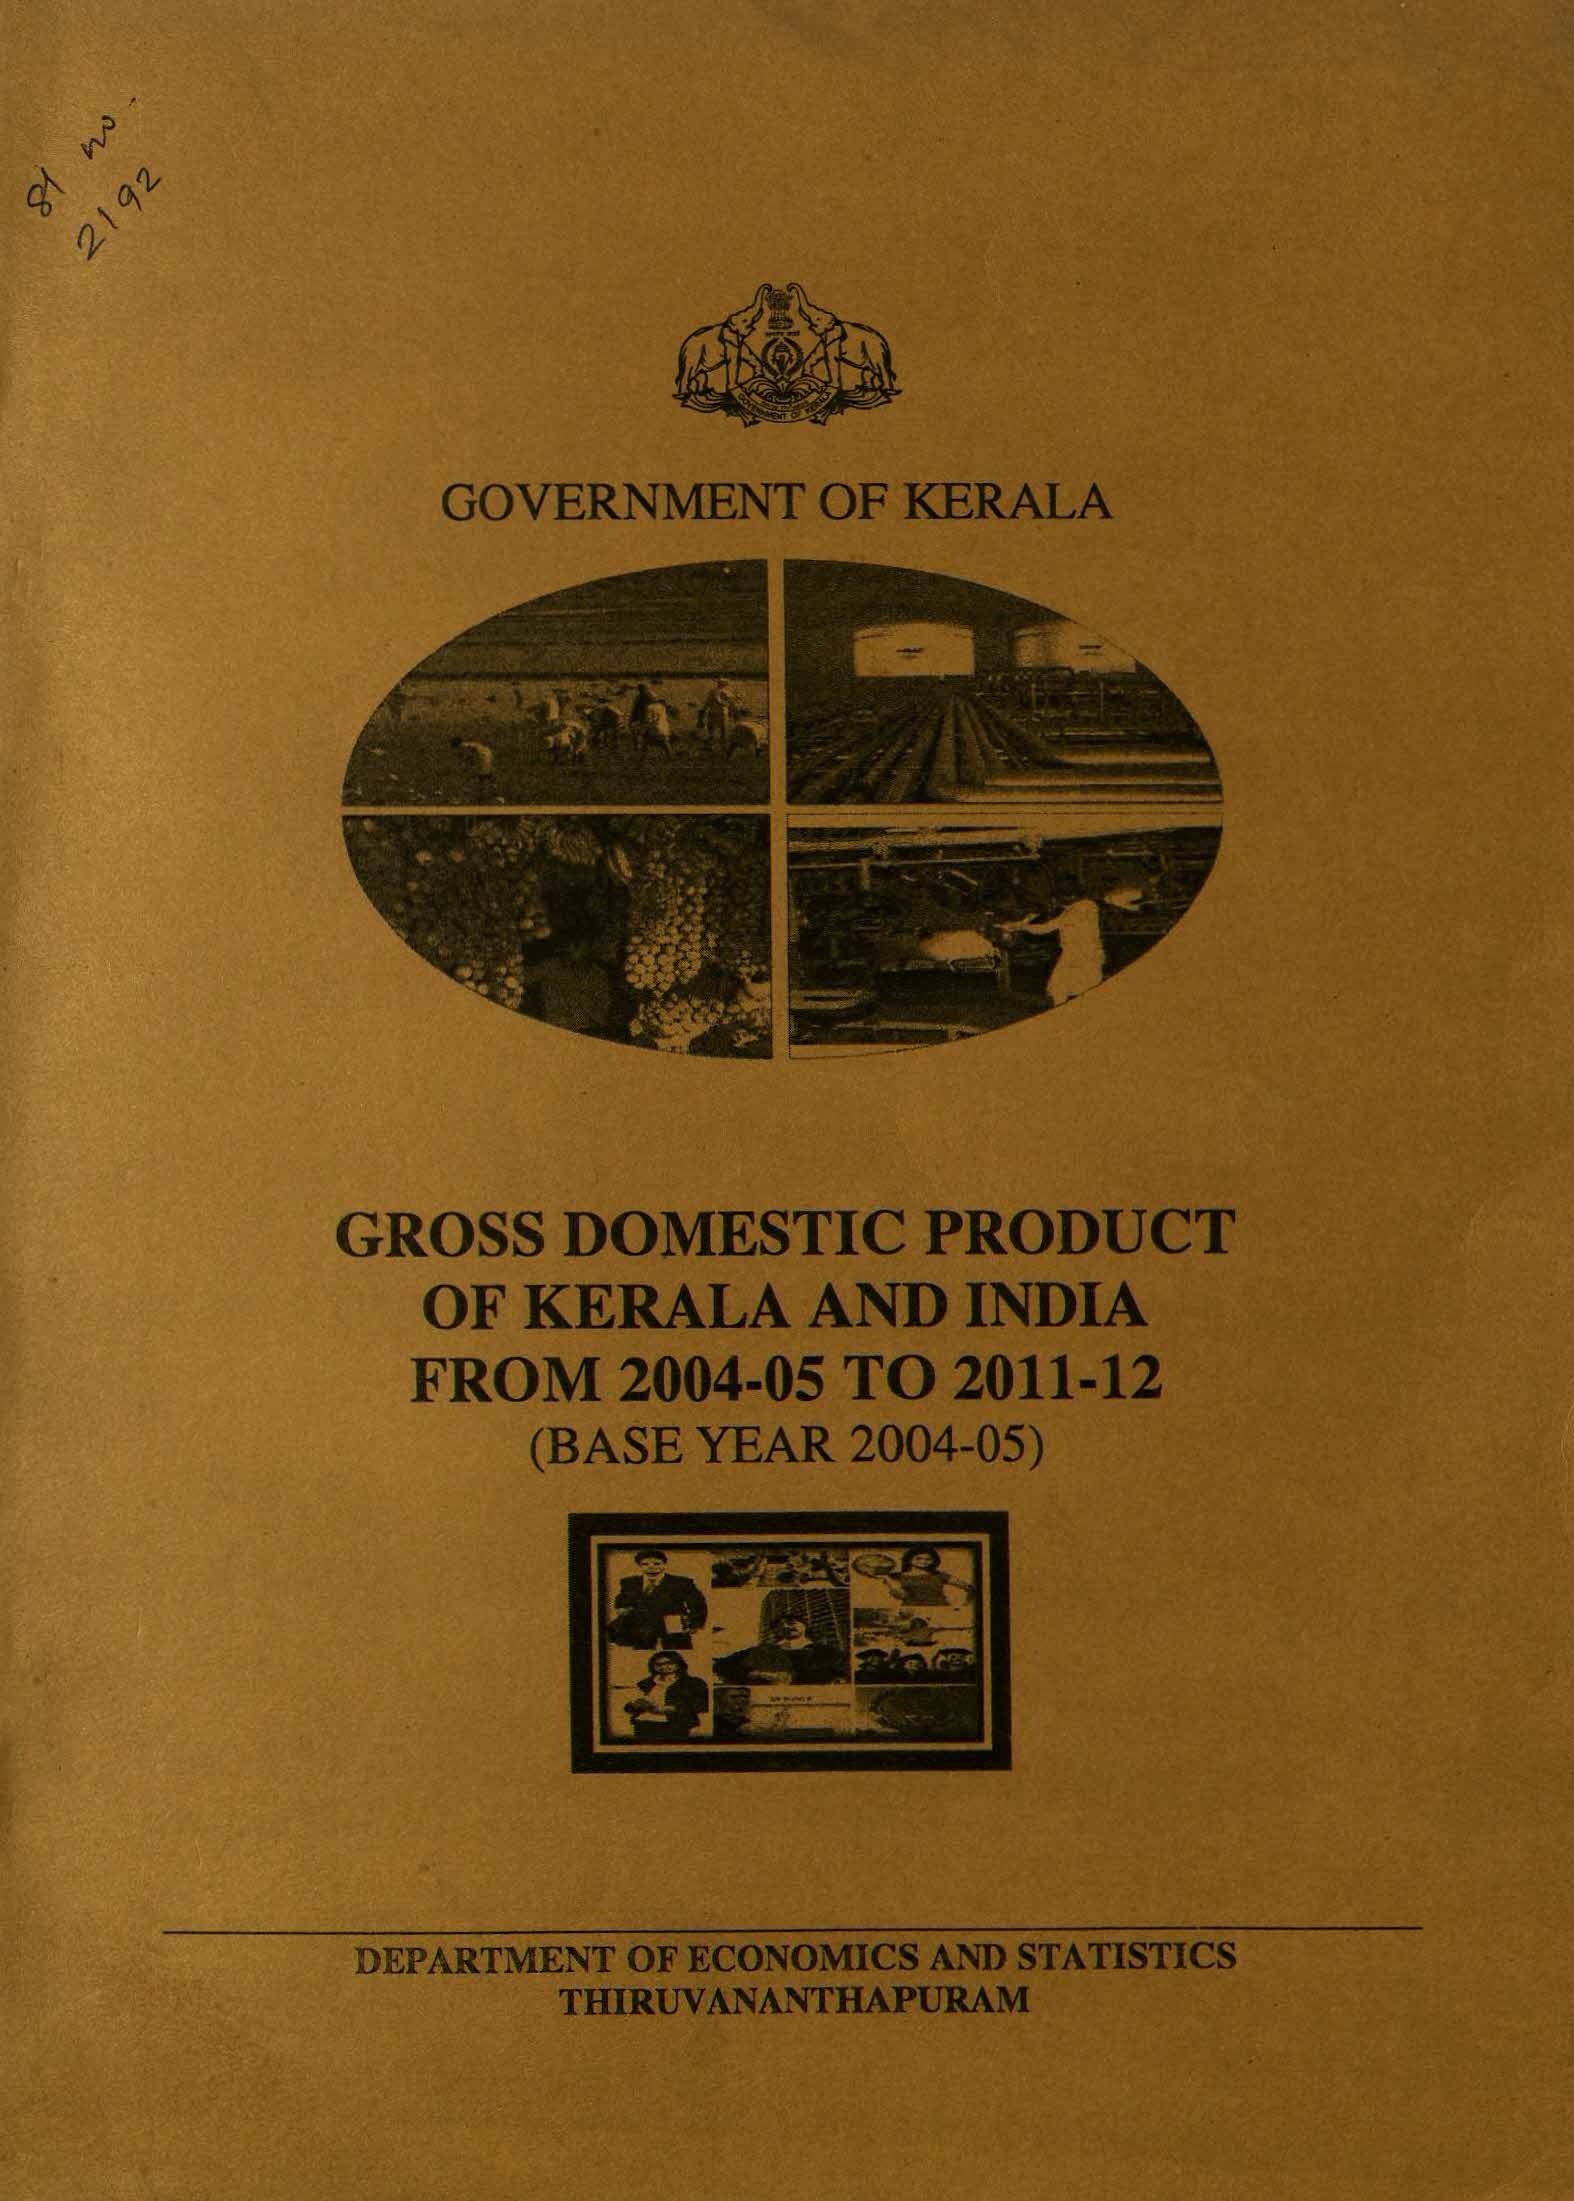 Gross Domestic Product Of Kerala And India From 2004-05 To 2011-12